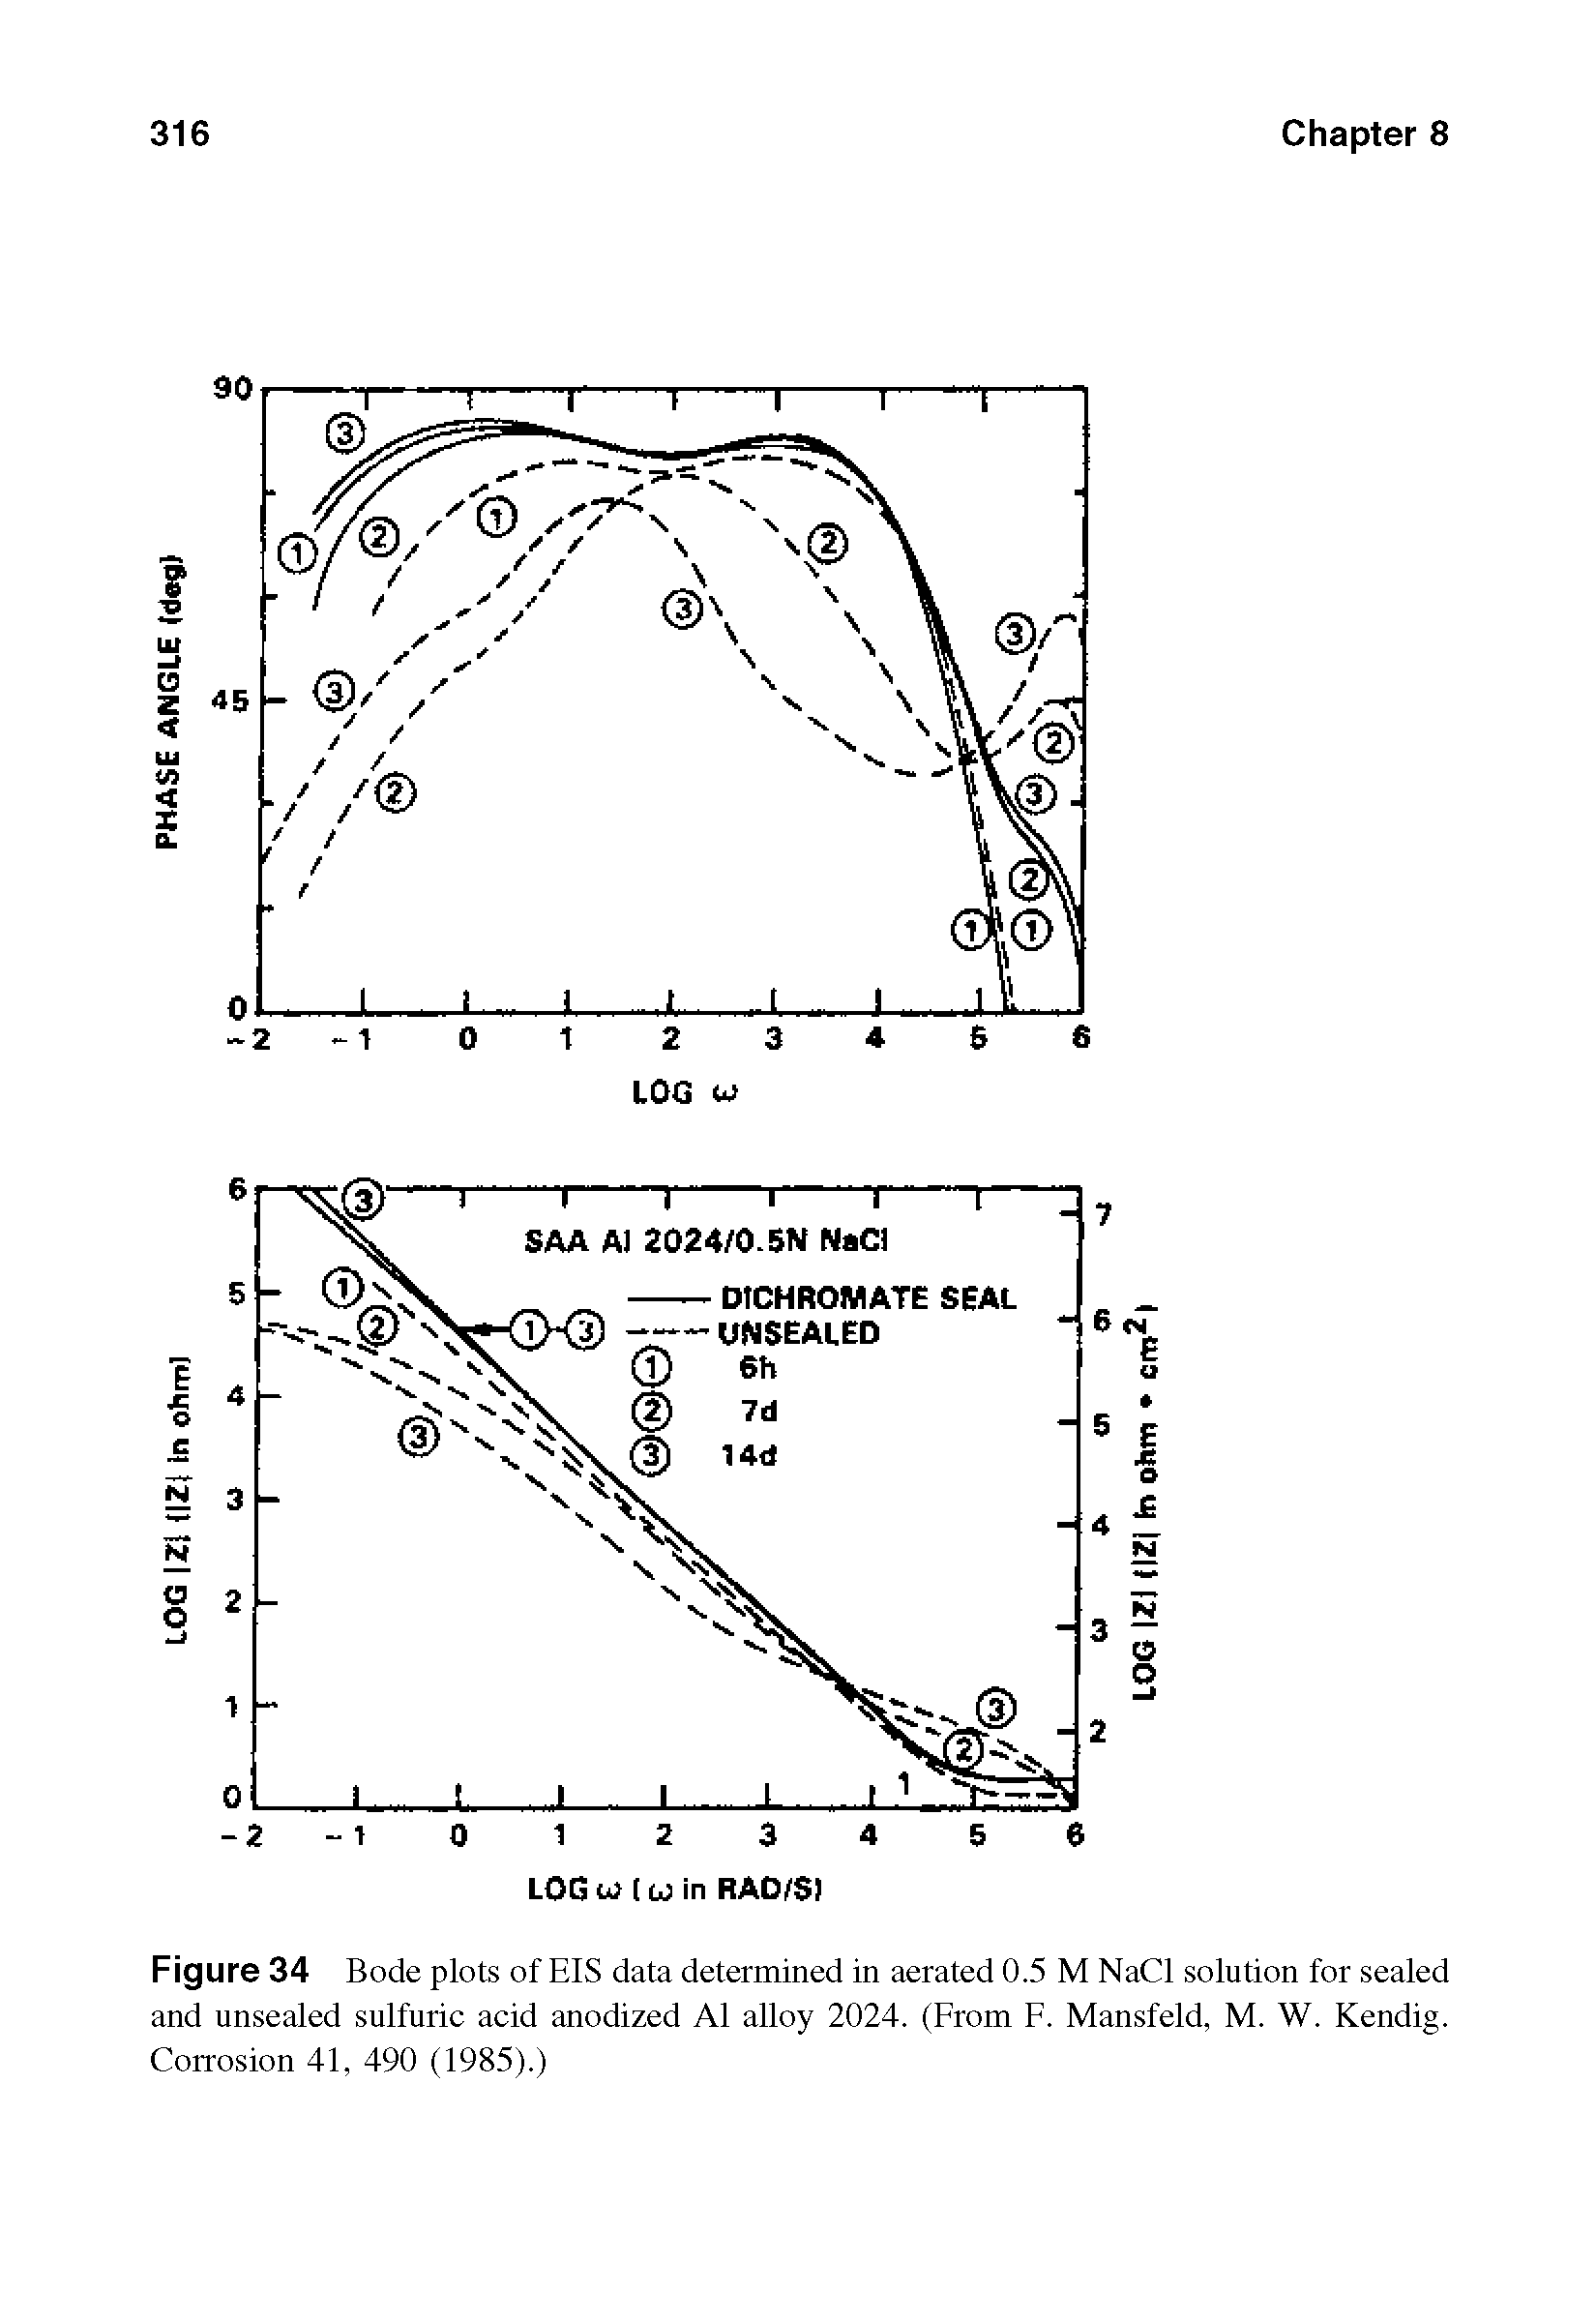 Figure 34 Bode plots of EIS data determined in aerated 0.5 M NaCl solution for sealed and unsealed sulfuric acid anodized A1 alloy 2024. (From F. Mansfeld, M. W. Kendig. Corrosion 41, 490 (1985).)...